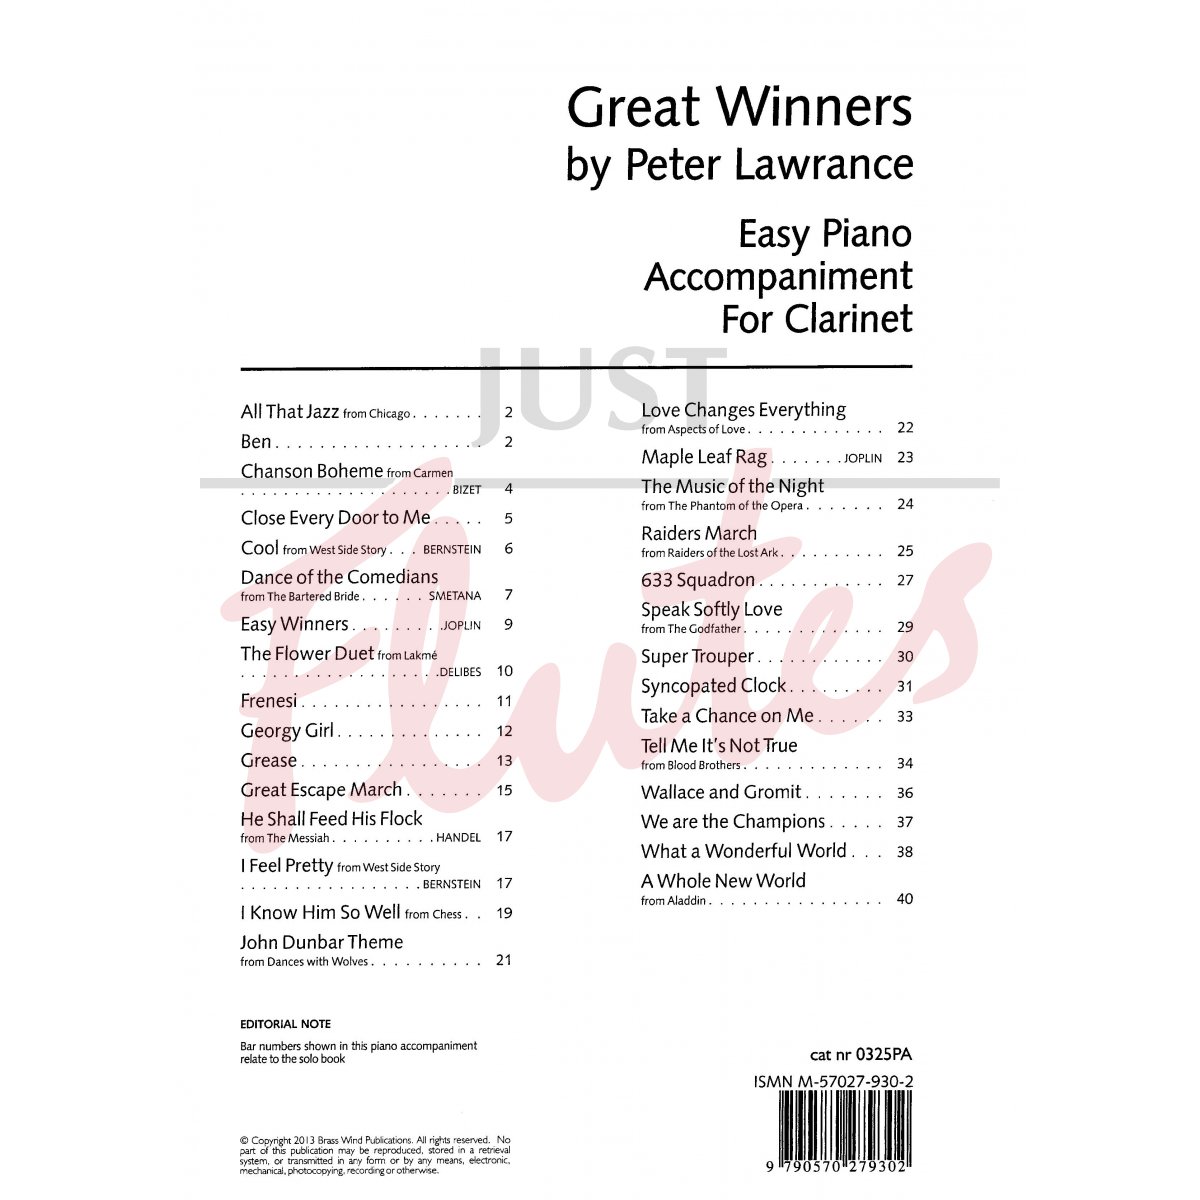 Great Winners for Clarinet [Piano Accompaniment Book]